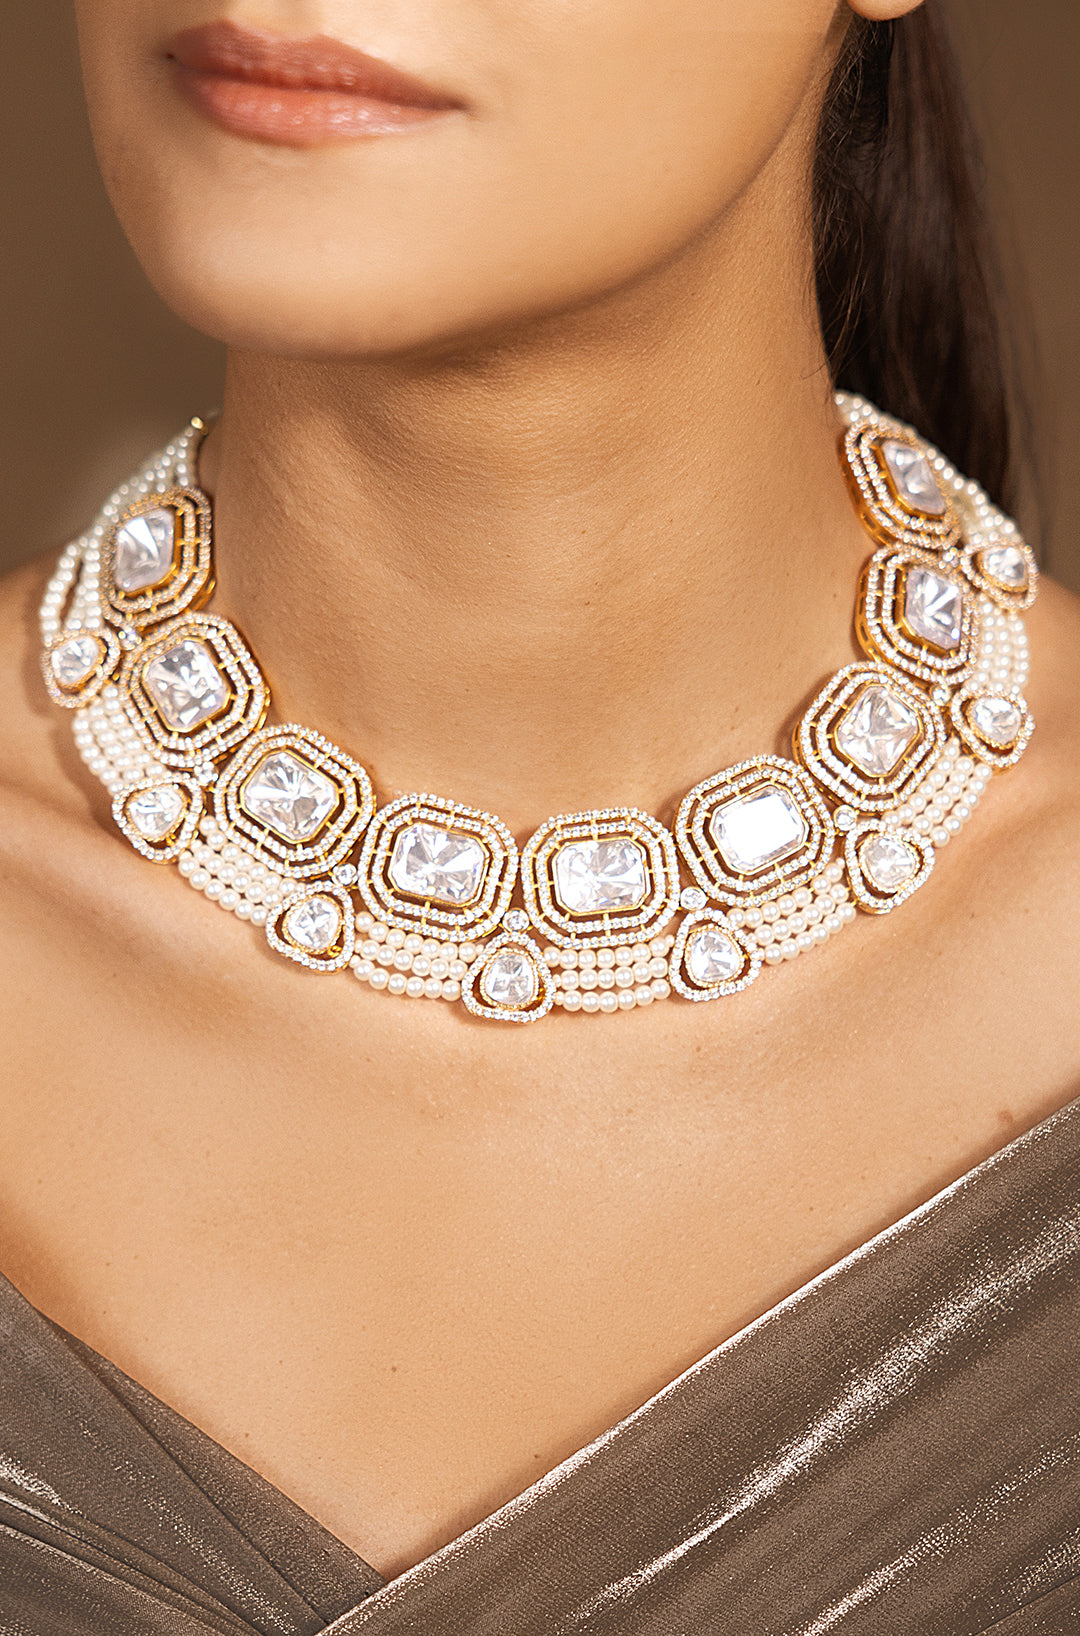 Luxe Golden-White Choker Necklace